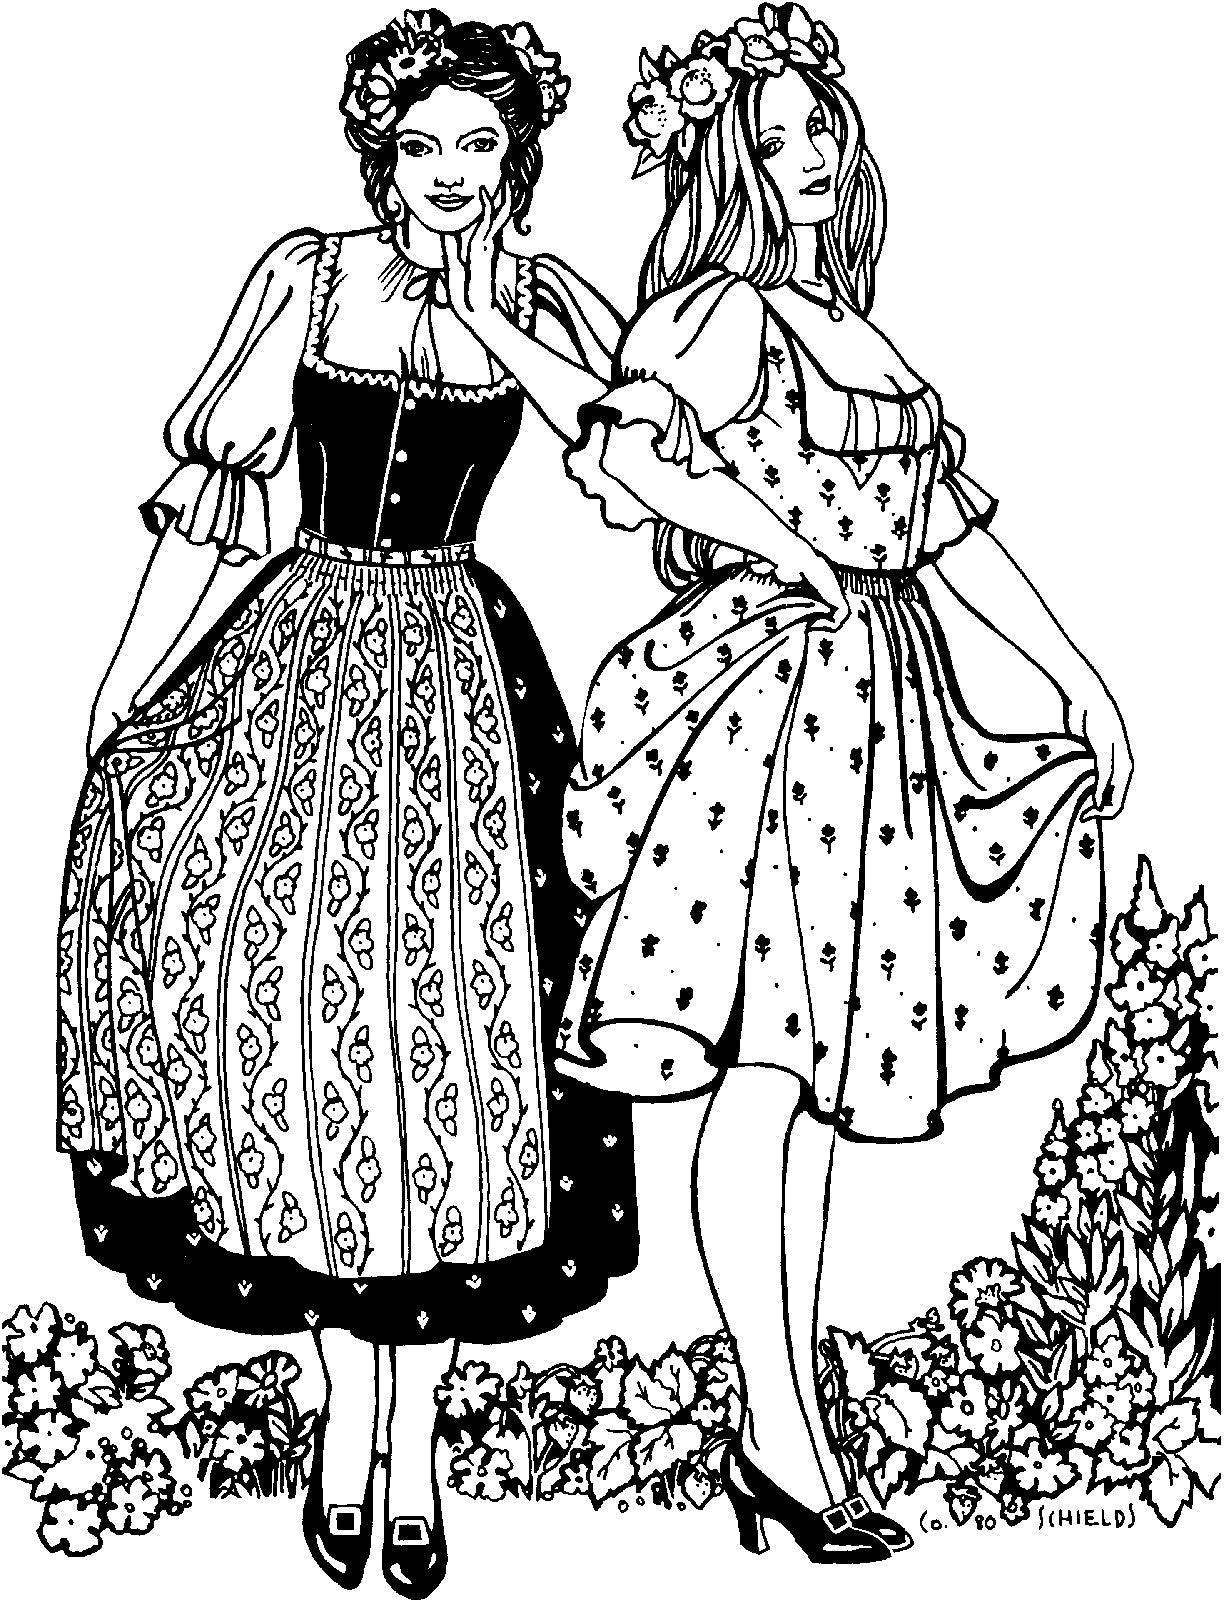 Pen and Ink drawing by artist Gretchen Shields.  Two women wearing 123 Austrian Dirndl. Woman on left is wearing view A with an apron.  Woman on right is wearing view B holding the skirt of the dress in her hands.  Both wear flower crowns.